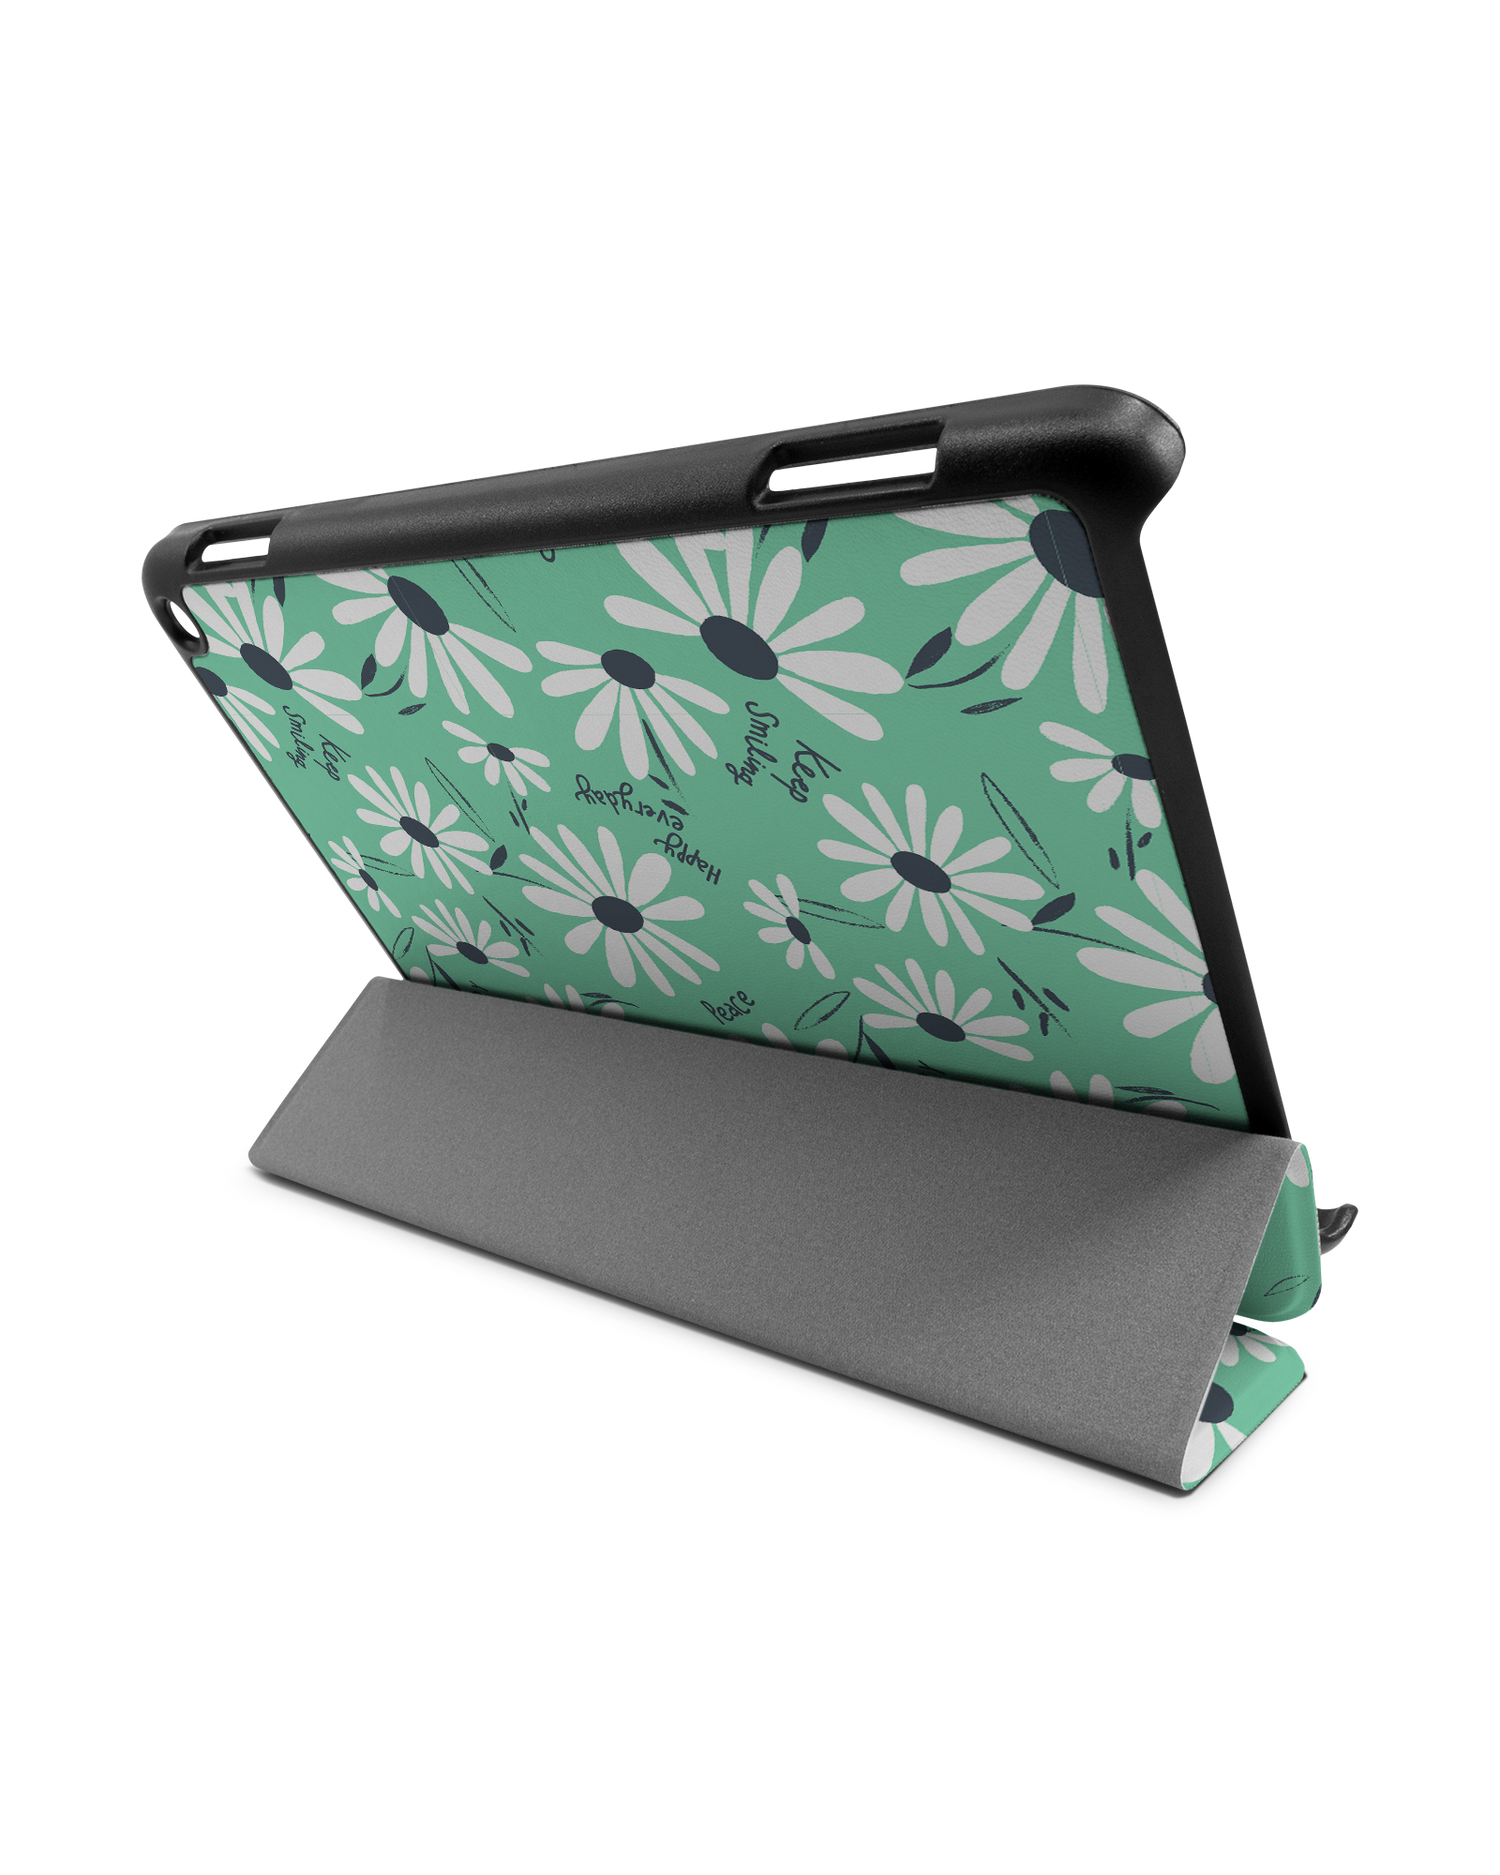 Positive Daisies Tablet Smart Case for Amazon Fire HD 8 (2022), Amazon Fire HD 8 Plus (2022), Amazon Fire HD 8 (2020), Amazon Fire HD 8 Plus (2020): Used as Stand